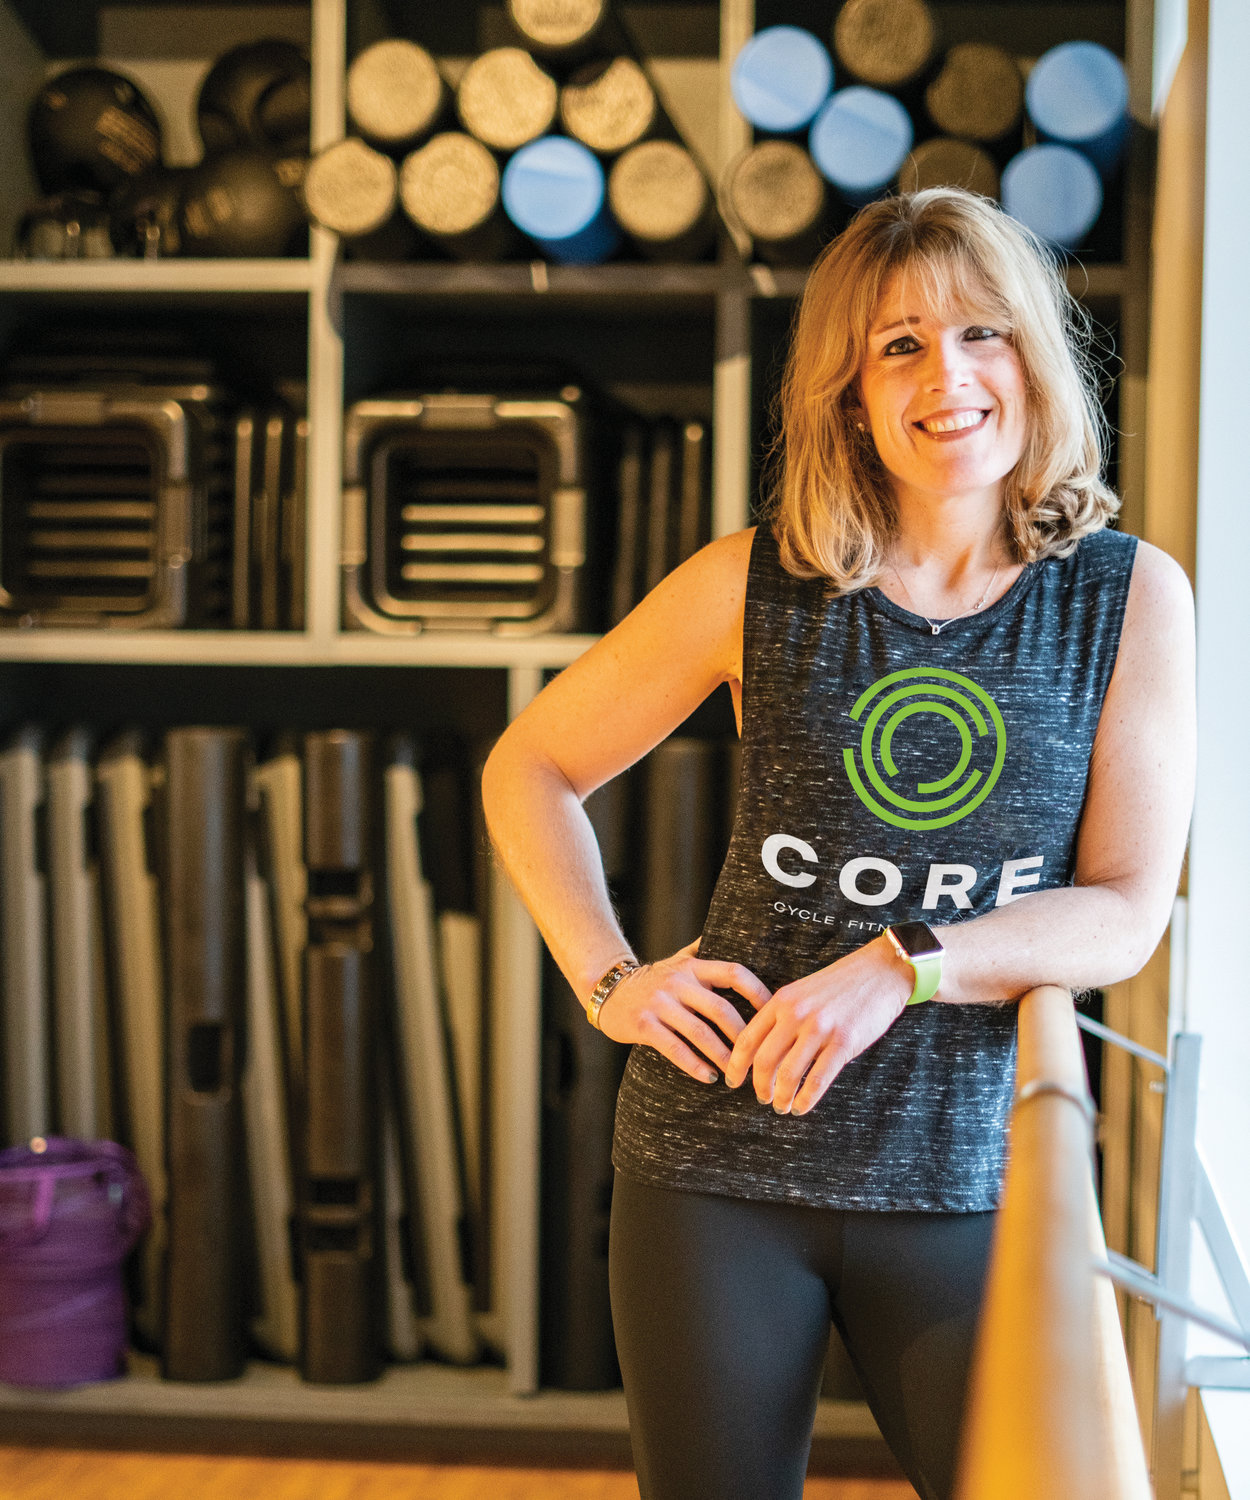 Leading Ladies 2019: Denise Chakoian, Fitness Expert/Owner of CORE in Providence and Pawtucket